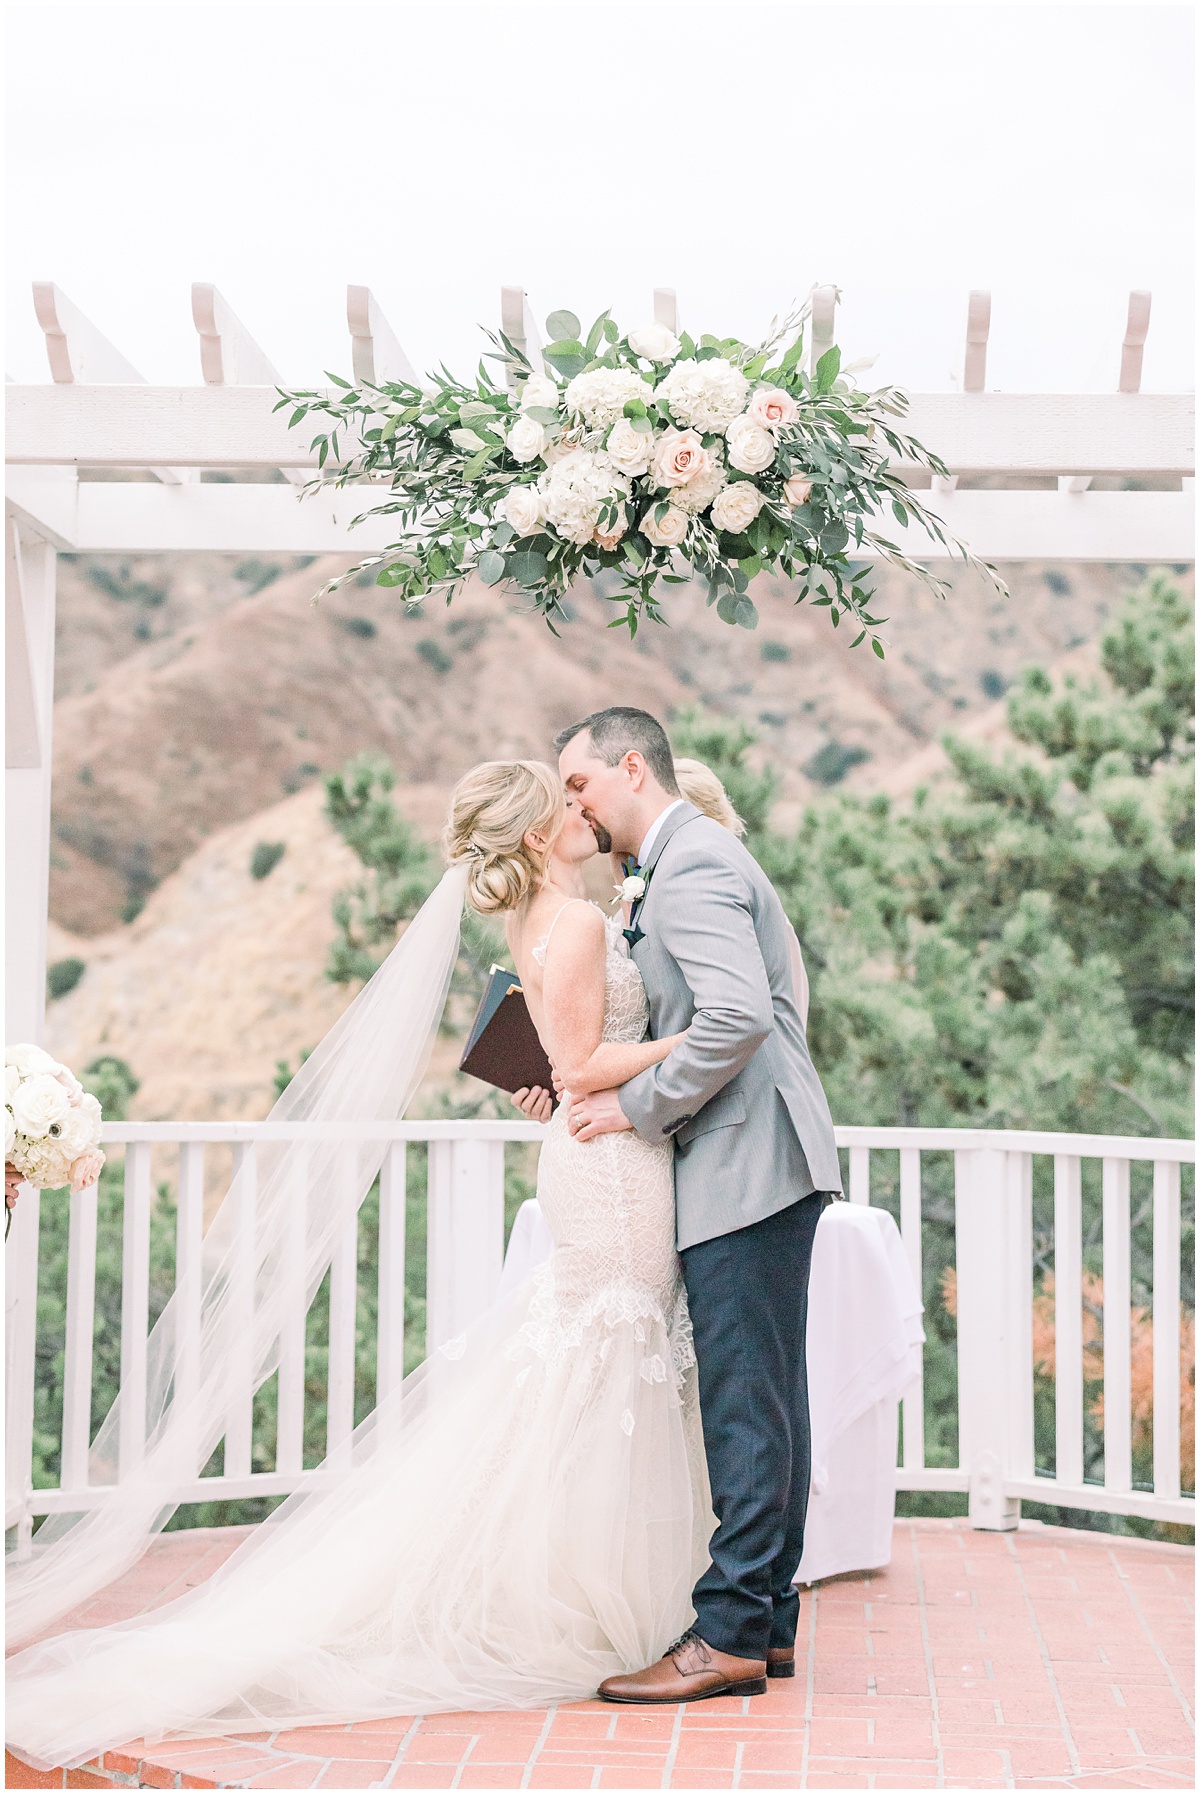 First kiss | The Castaway Burbank Wedding by Peter and Bridgette